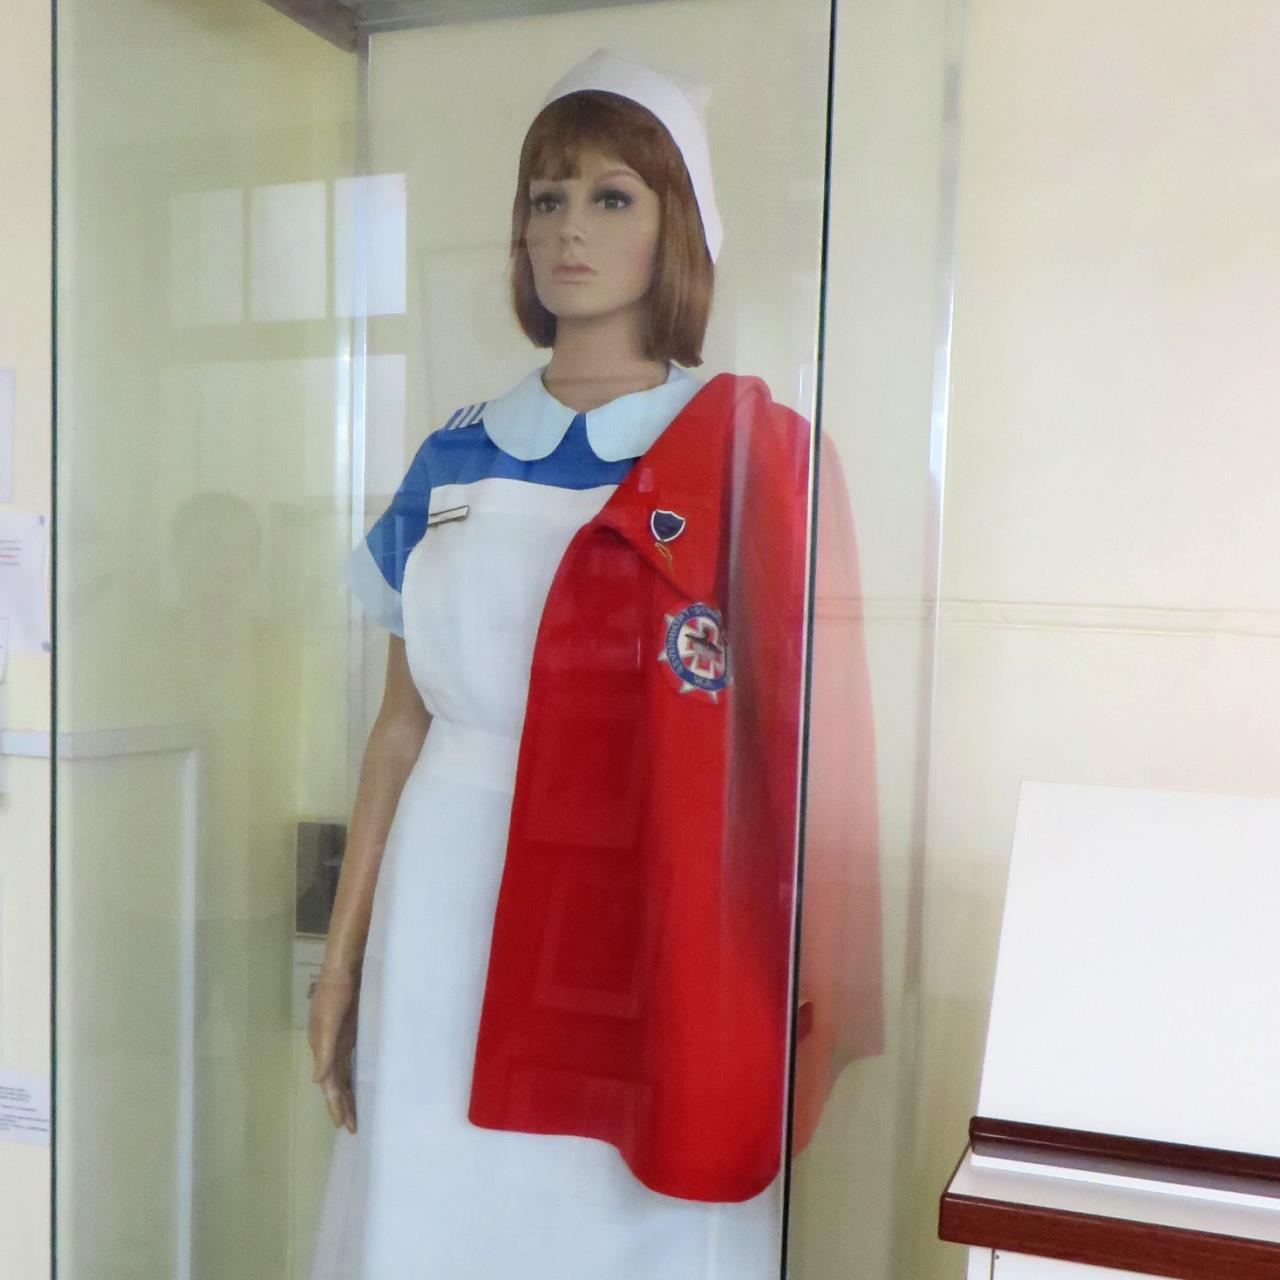 Student Nurse outfit on display at Victoria District Hospital